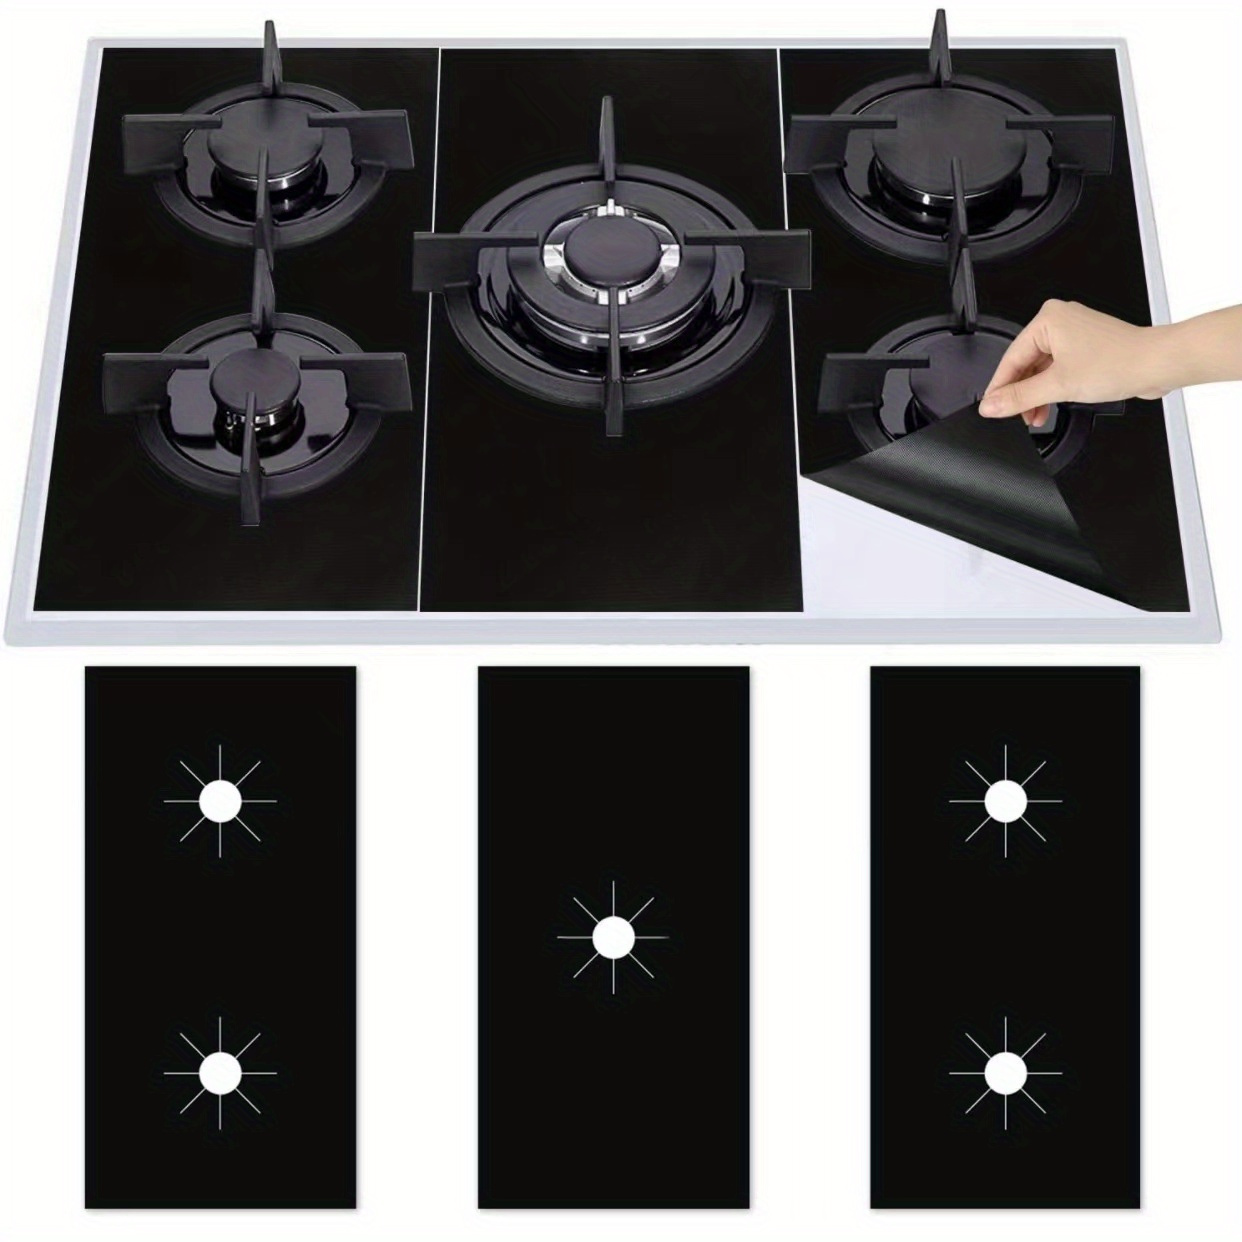 Stove Protector Cover Gap Liner Gas Stove Protectors Gaziniere for Gas Stove  Pad Stovetop Burner Protector